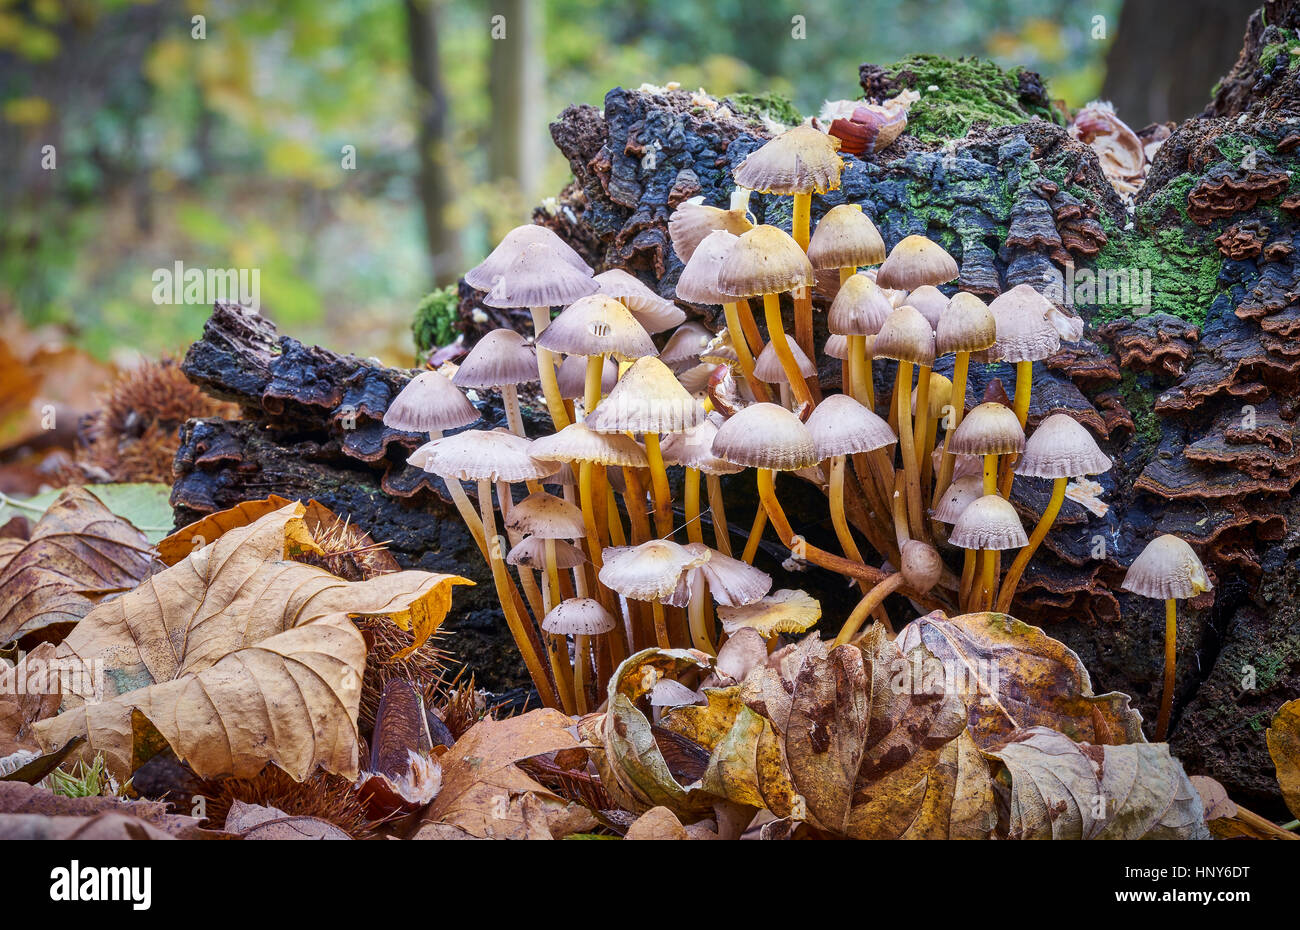 A colony of toadstools growing on a tree stump in the woods Stock Photo